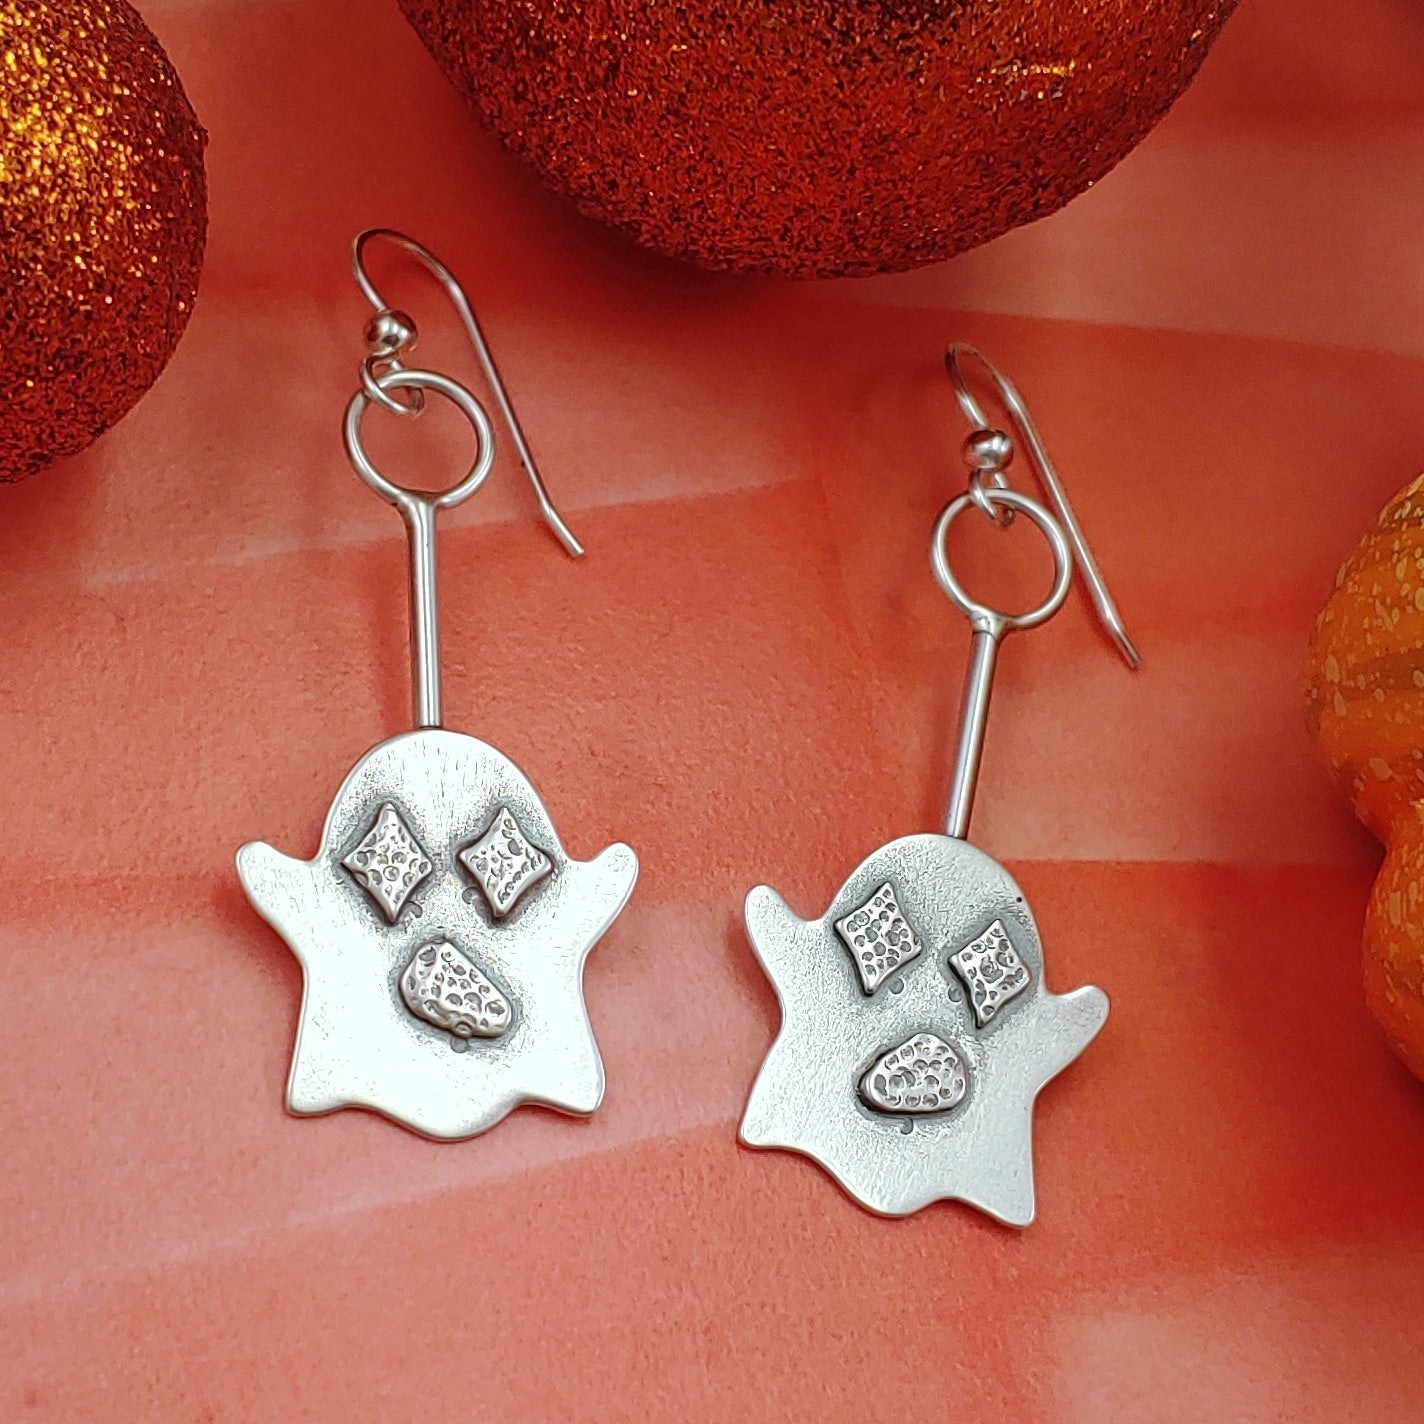 Cute sterling silver ghost earrings with stamped retro star shaped eyes on an orange background.